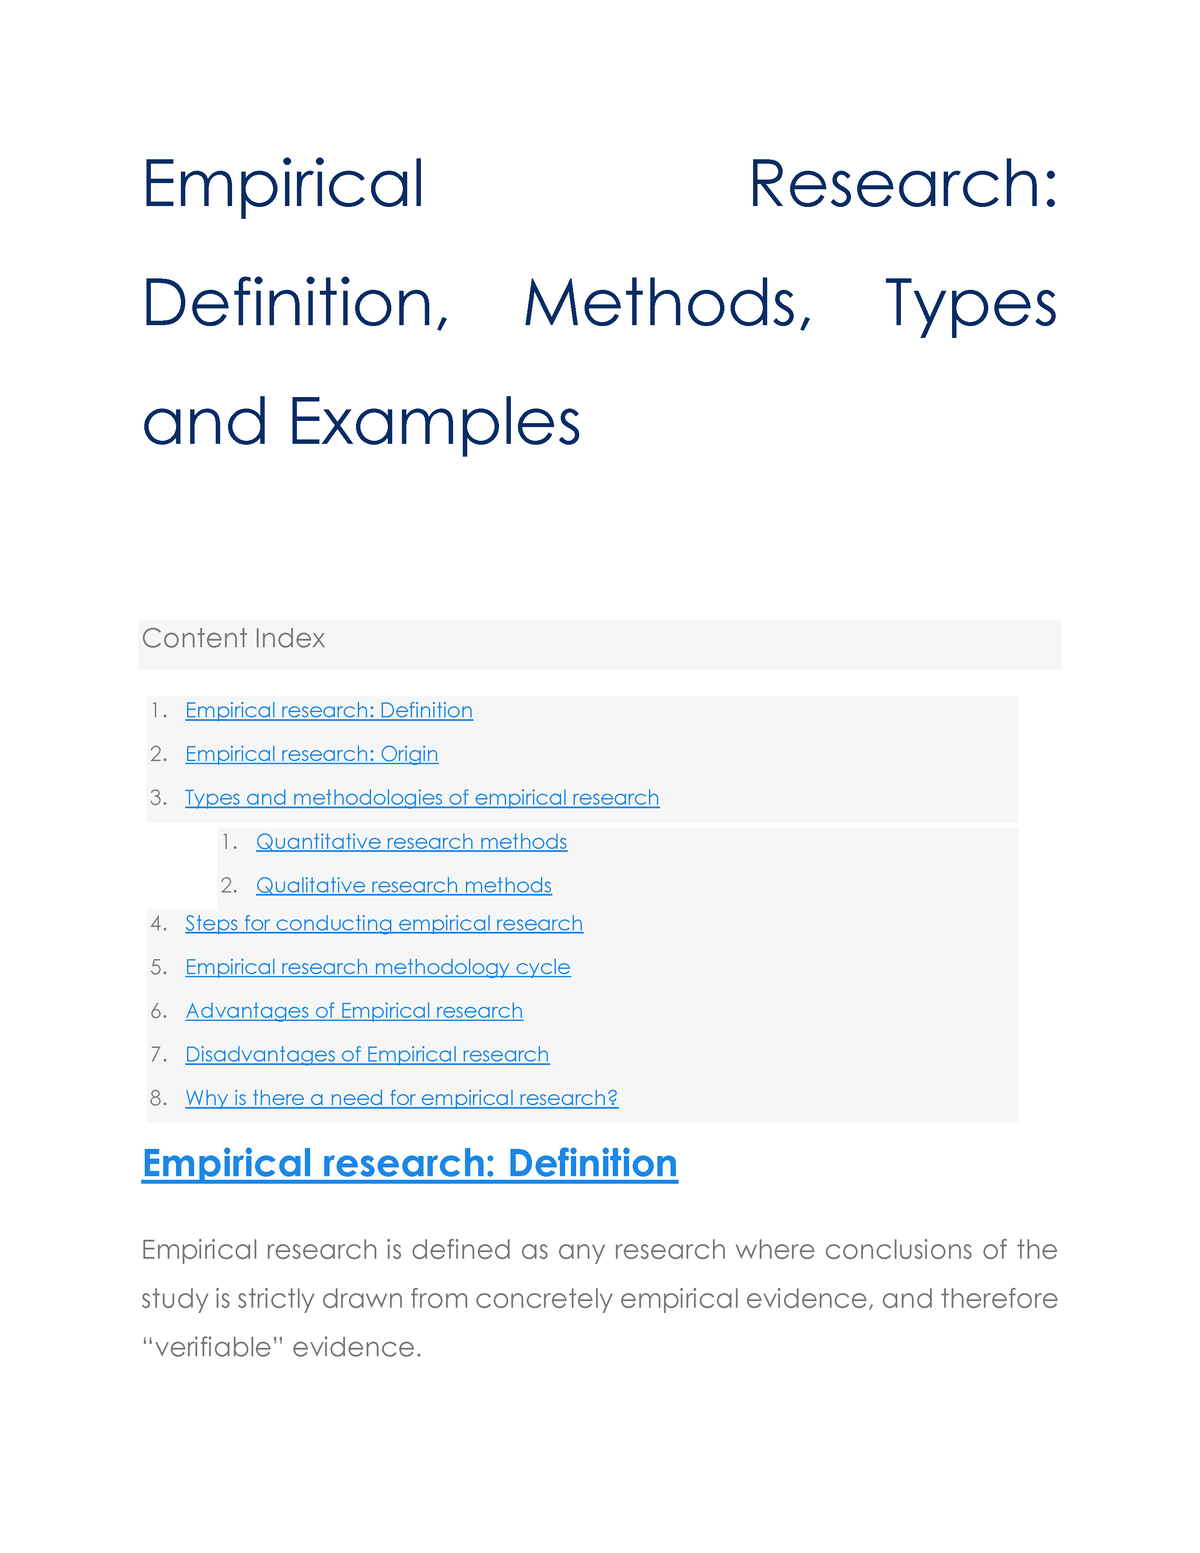 proposing empirical research a guide to the fundamentals pdf